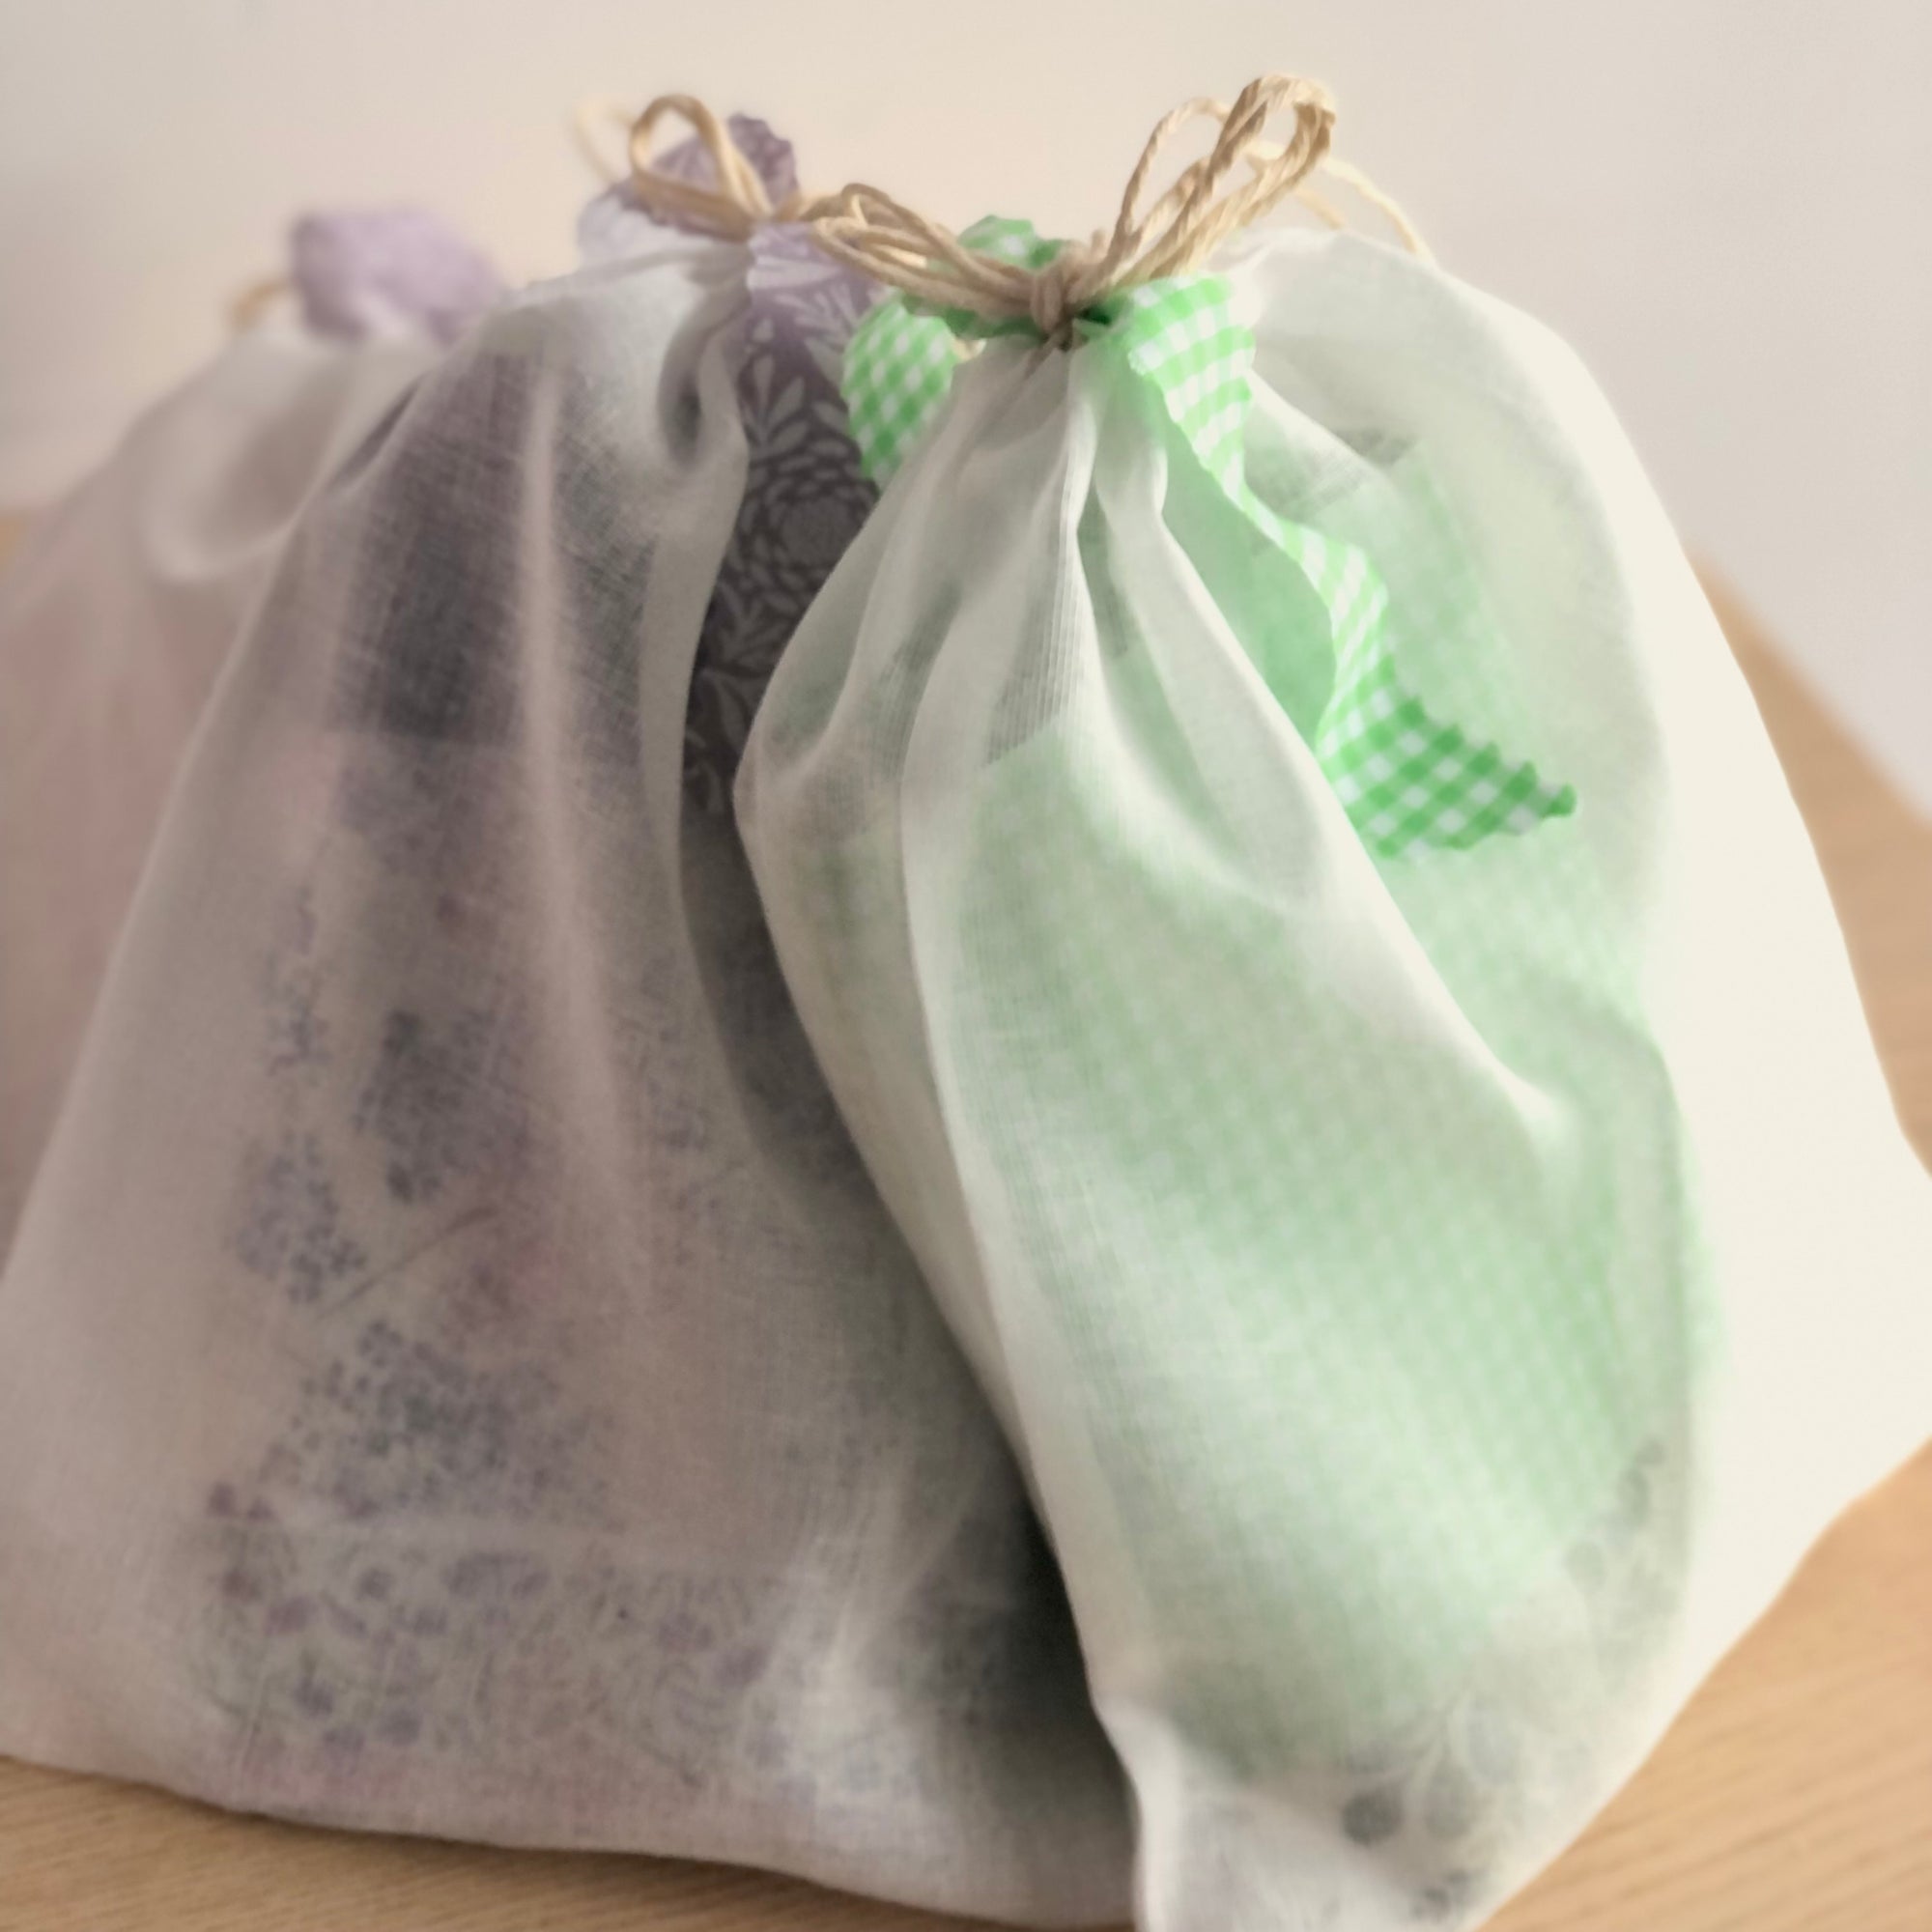 Remnant Bag in Purples or Greens